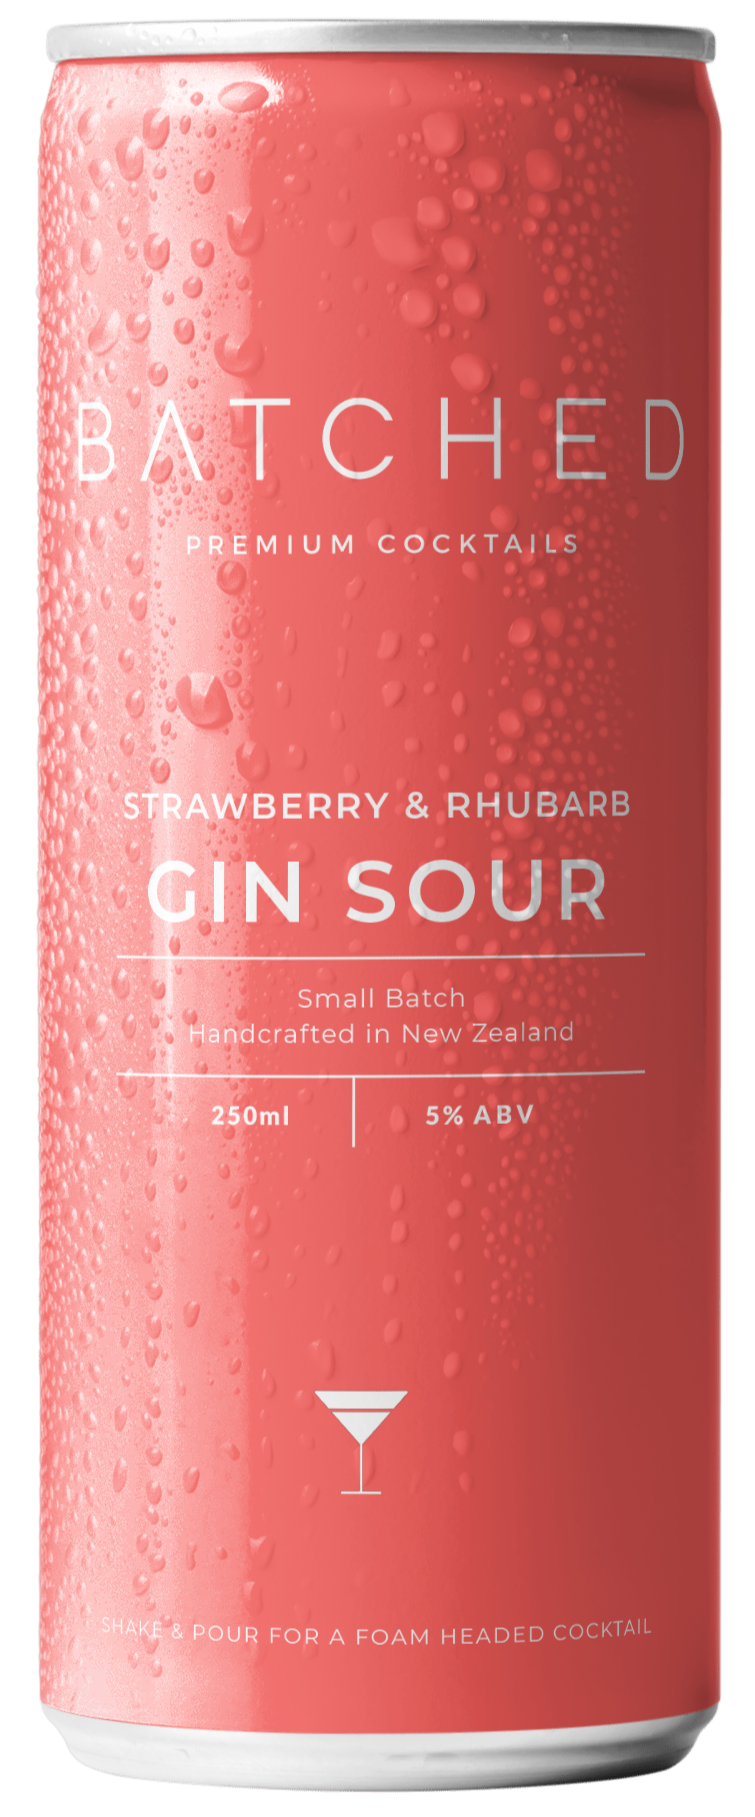 Batched Gin Sour Strawberry & Rhubarb Cocktail Cans 4x230ml